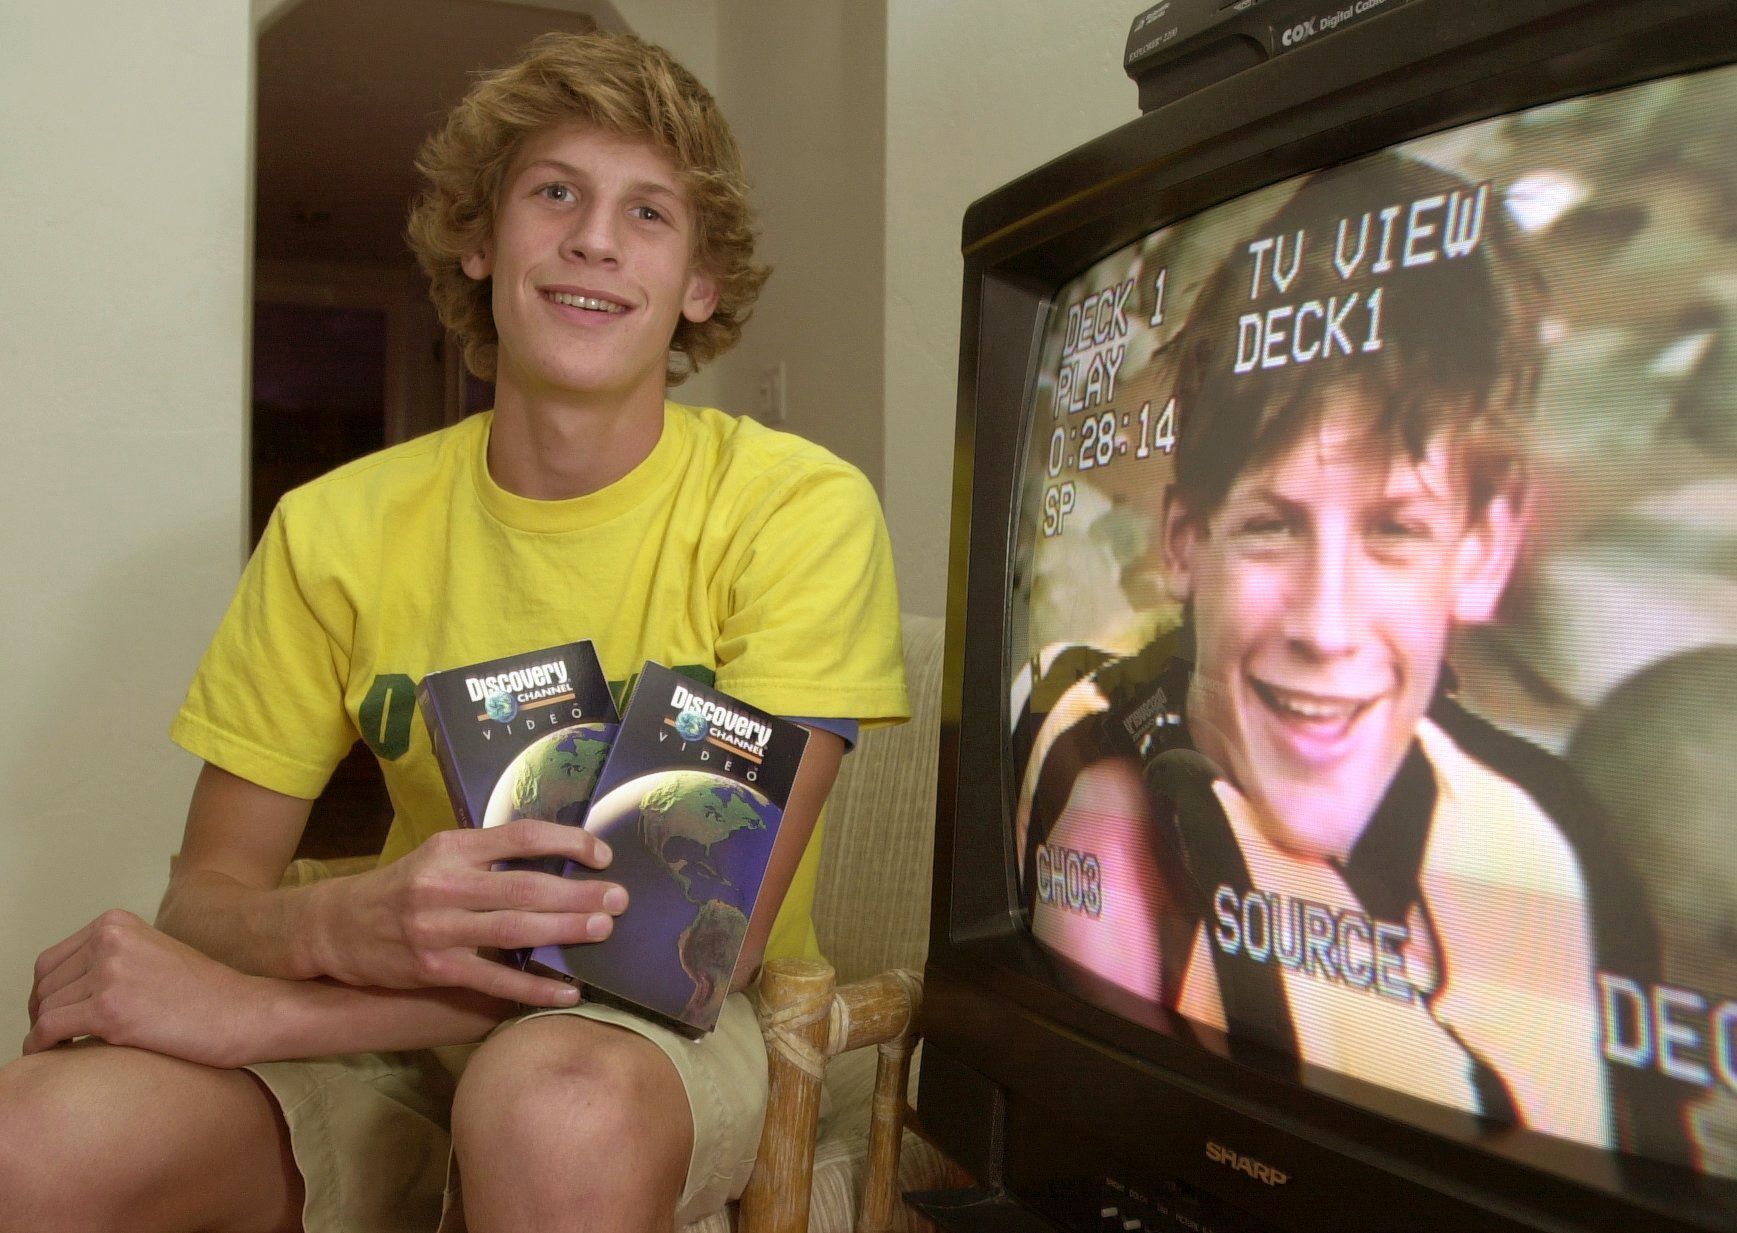 In this Nov. 6, 2002, photo, Charlie Keating IV, 16, poses for a photo in Phoenix for an upcoming series on the Discovery channel that he took part in. The Navy SEAL was a former Phoenix high school star distance runner and the grandson of the late Arizona financier involved in the 1980s savings and loan scandal.